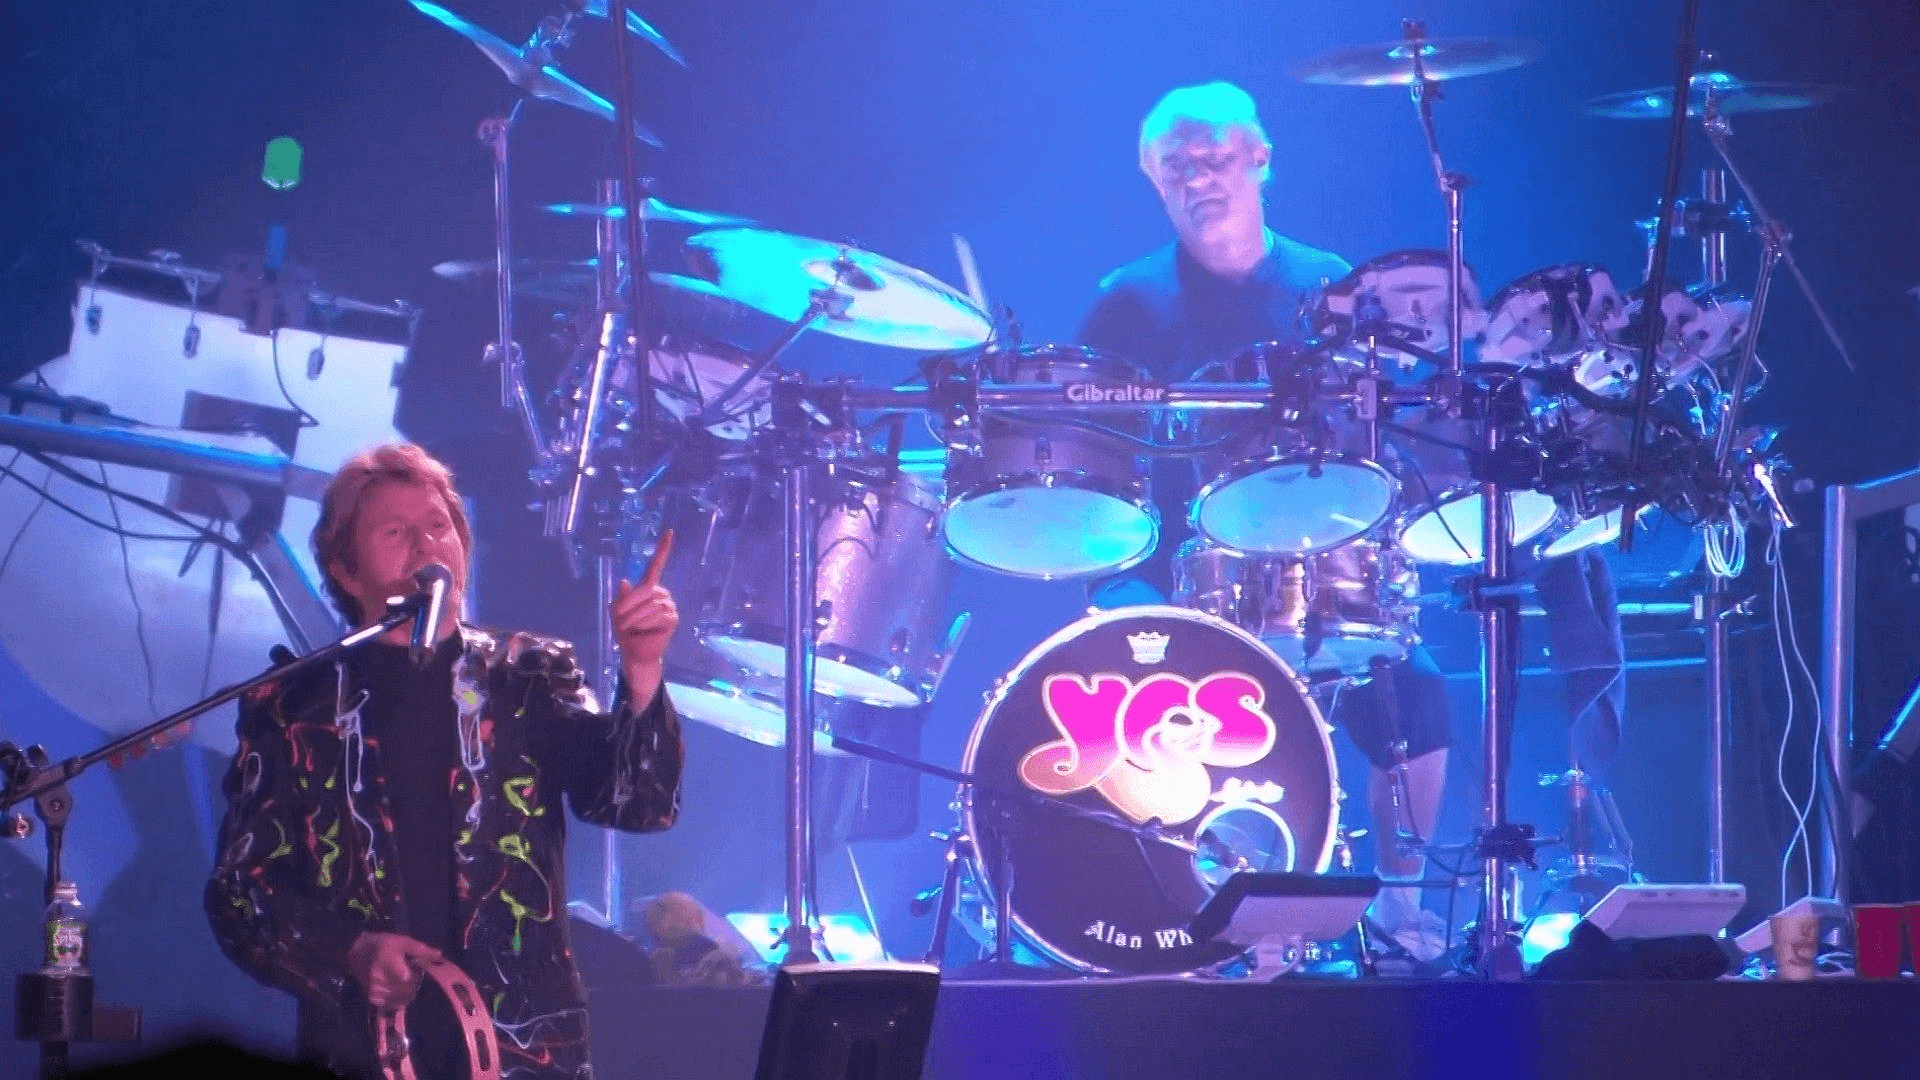 Yes - Songs From Tsongas 35th Anniversary